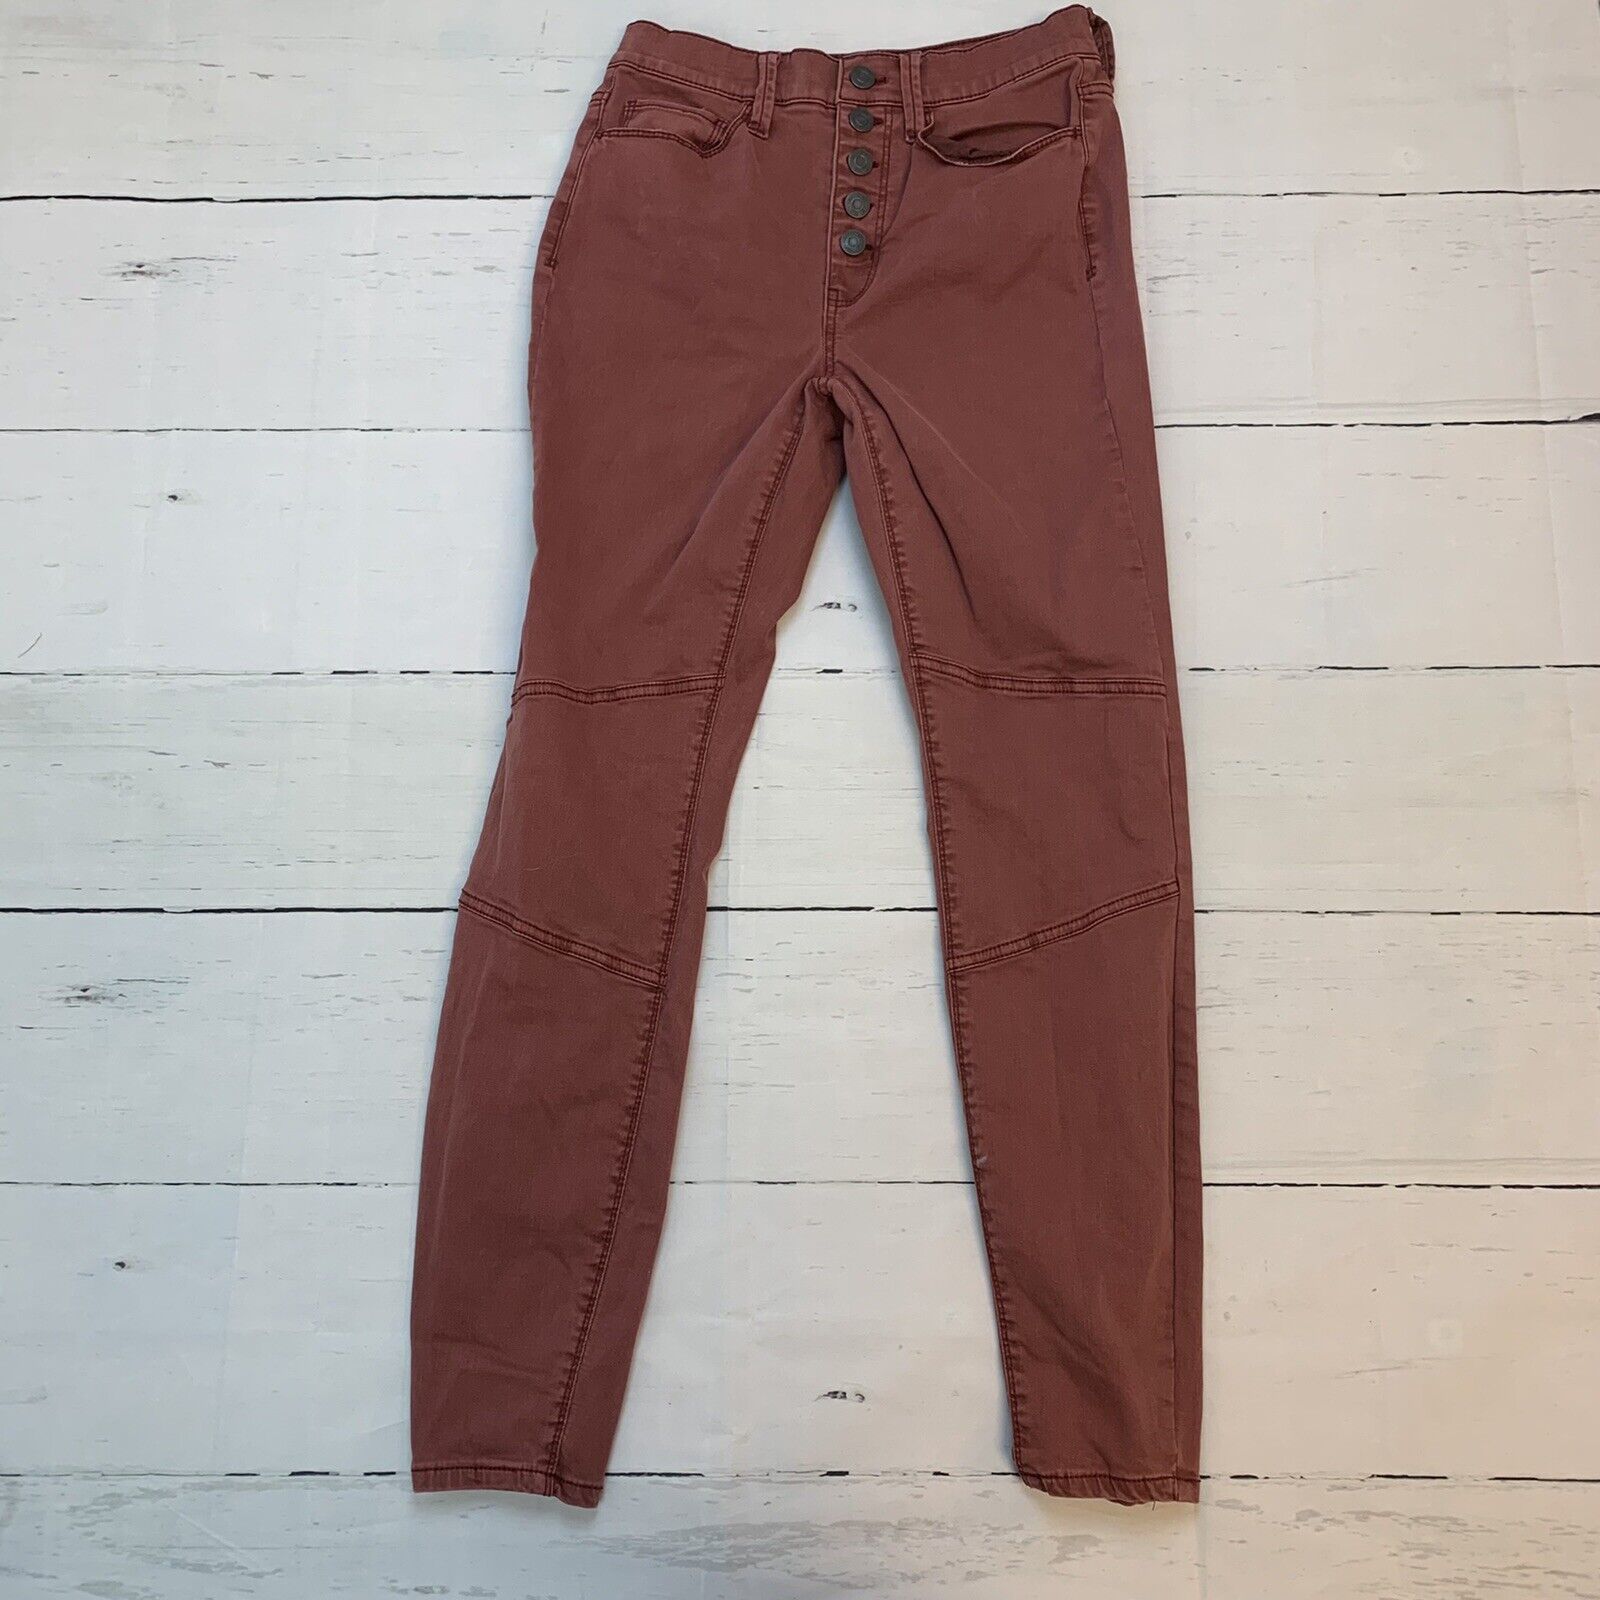 Mudd Red High Rise Jegging Pants Size 3